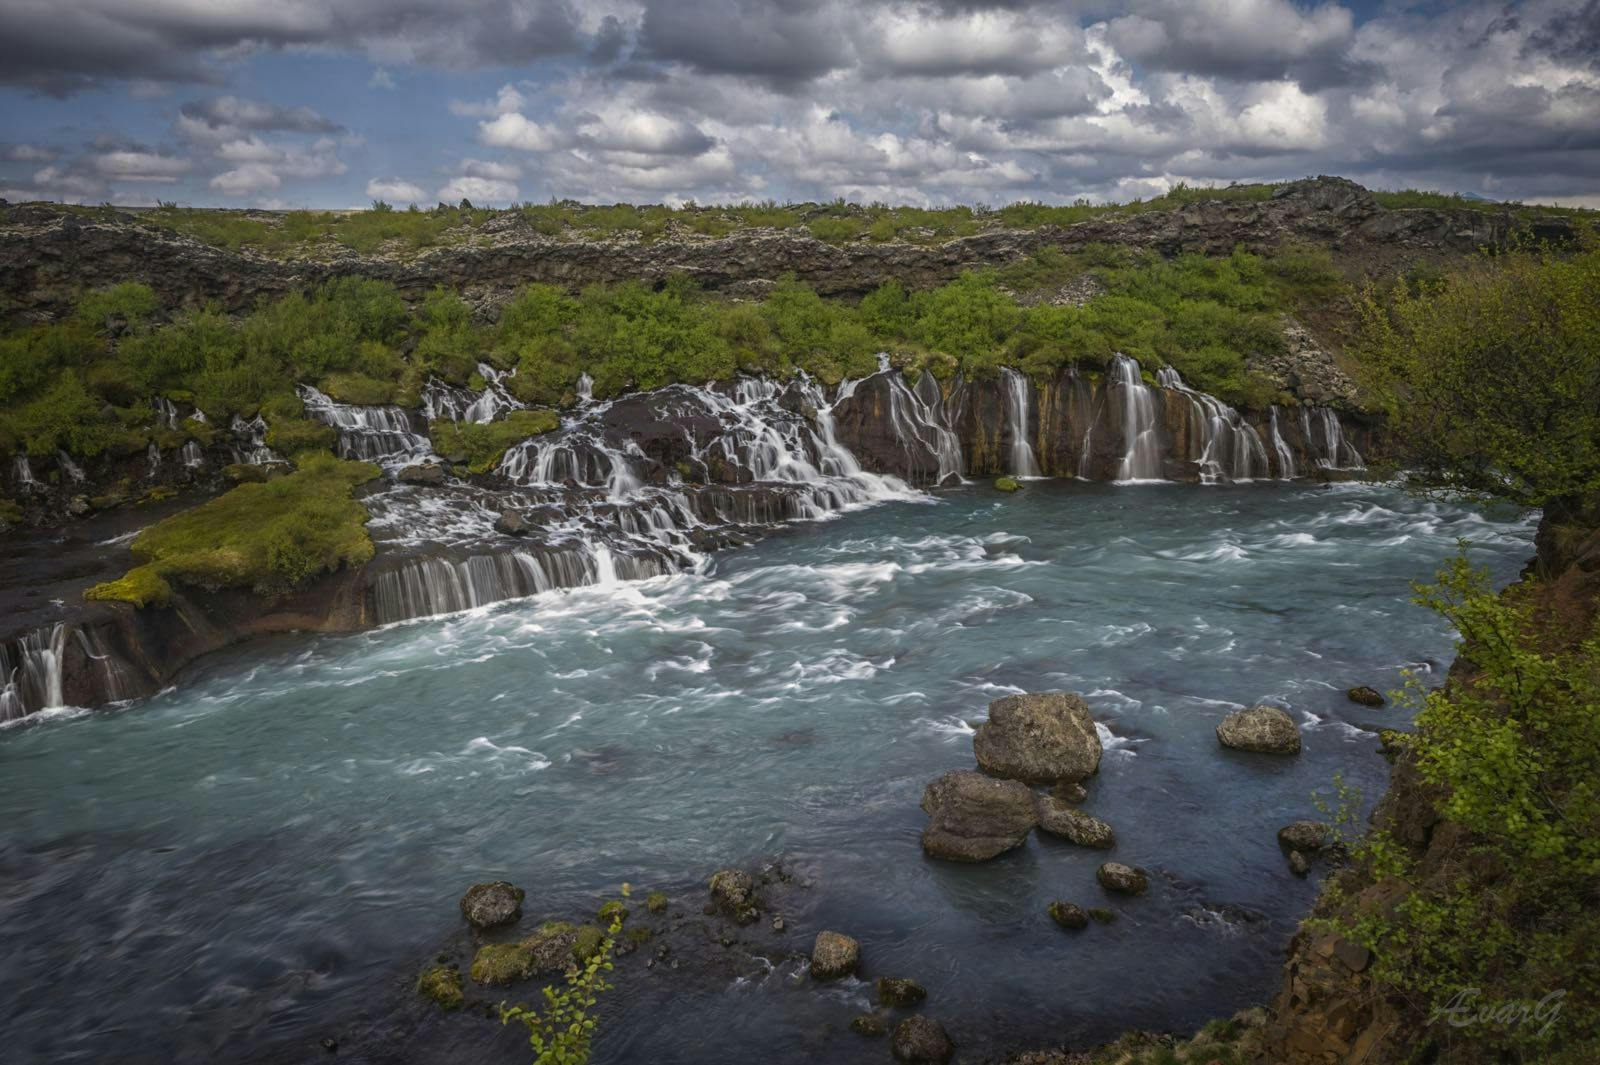 Hraunfossar is a series of beautiful waterfalls in West Iceland.